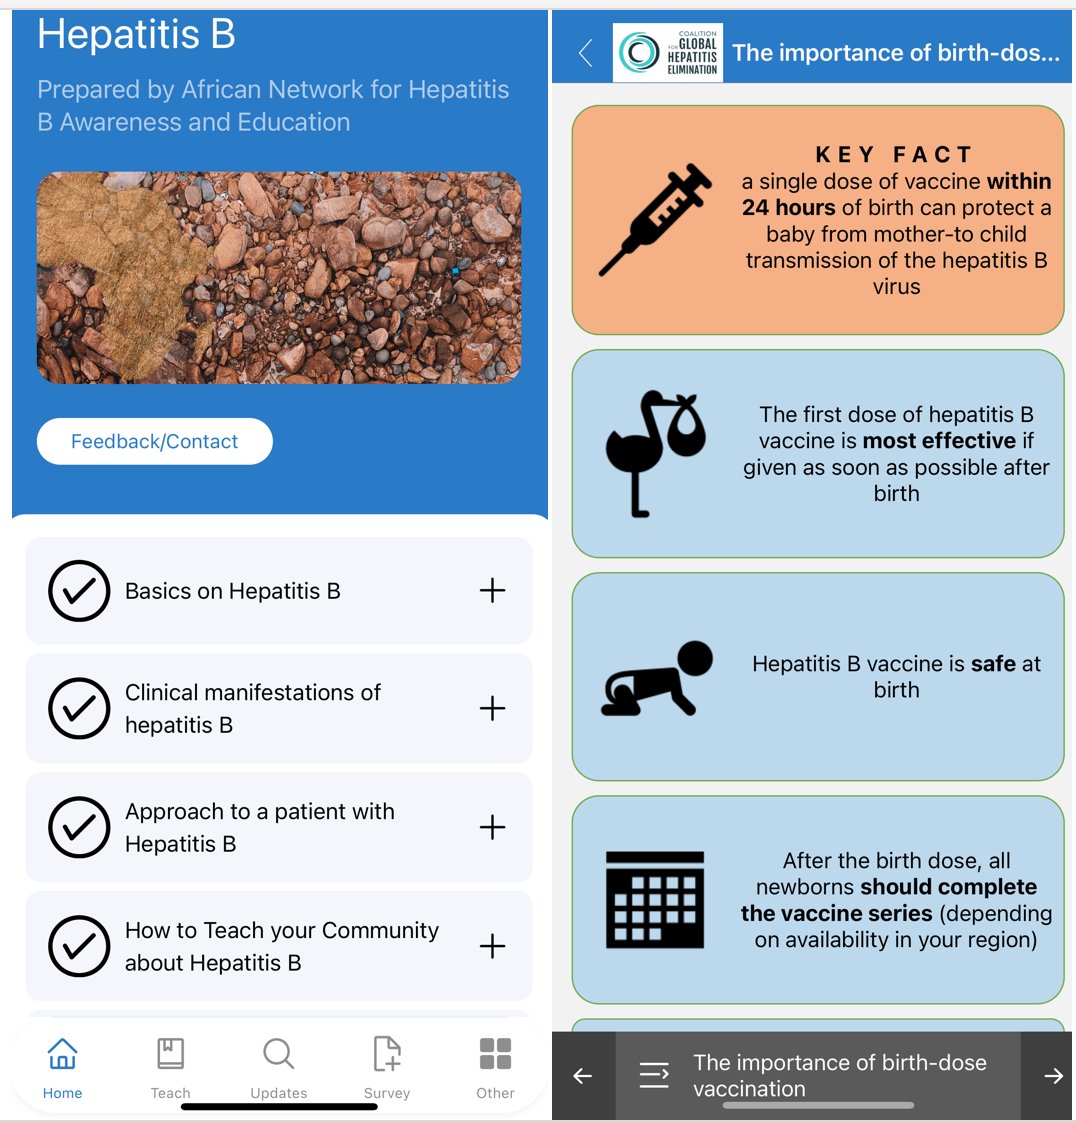 Our HBV app for Africa is out! Available on iOS & android For providers seeing HBV in Africa that are not experts Info on treatment, FU, vaccination, pregnancy, community education, etc Please share with those in the field! apps.apple.com/us/app/hbv-afr… @GlobalHep @HepBFoundation